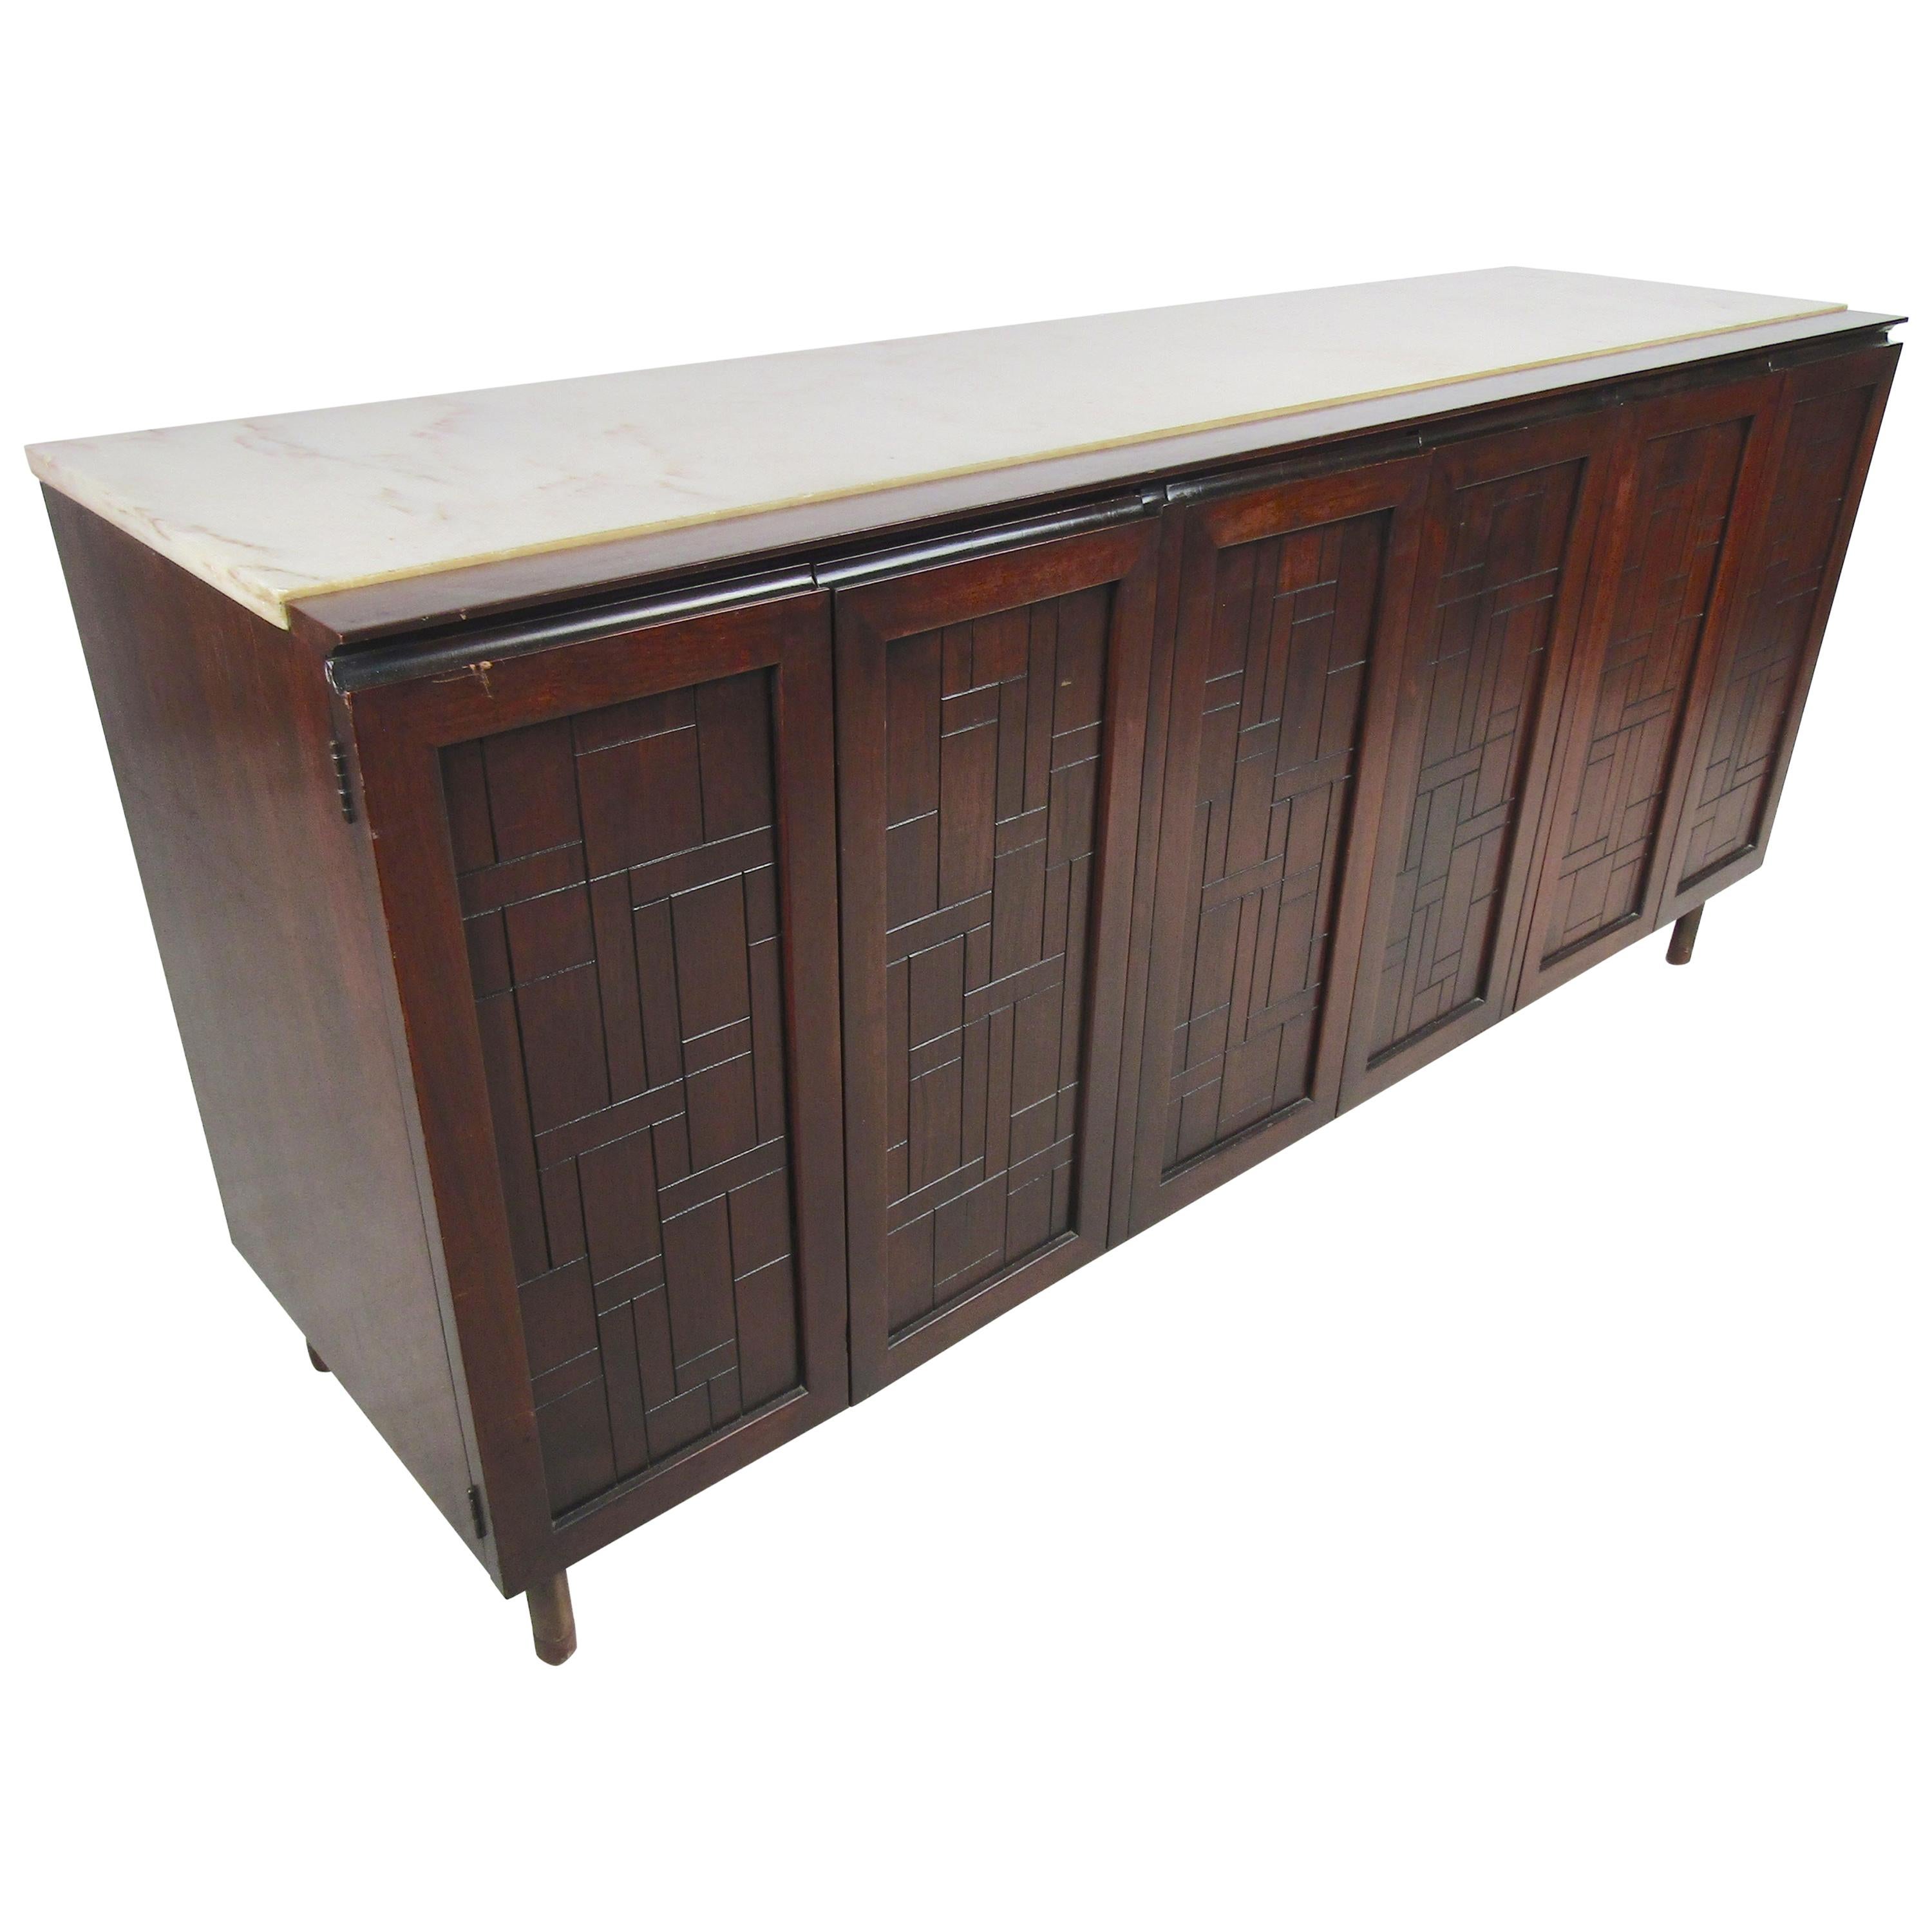 Mid-Century Modern Credenza with Travertine Topper from John Stuart